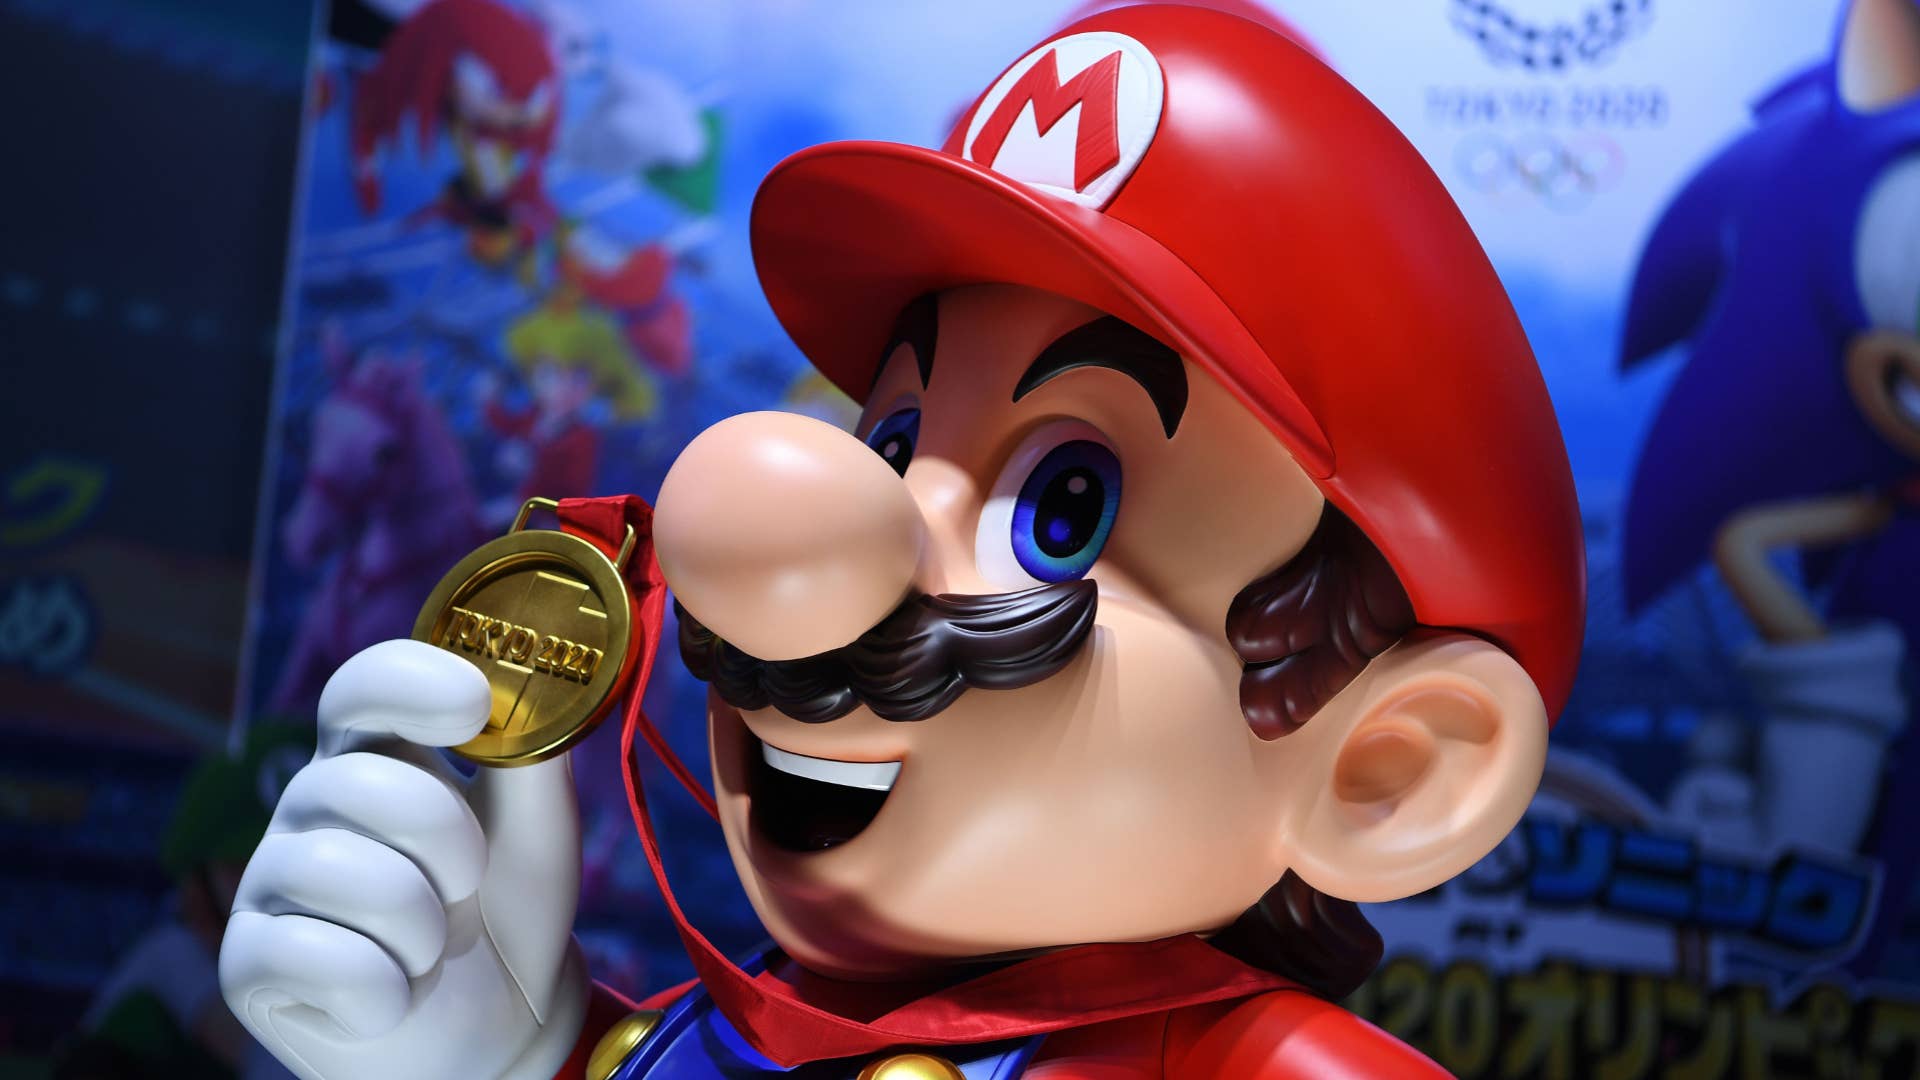 Mario is seen at a promotional booth for "Mario & Sonic at the Olympic Games Tokyo 2020."